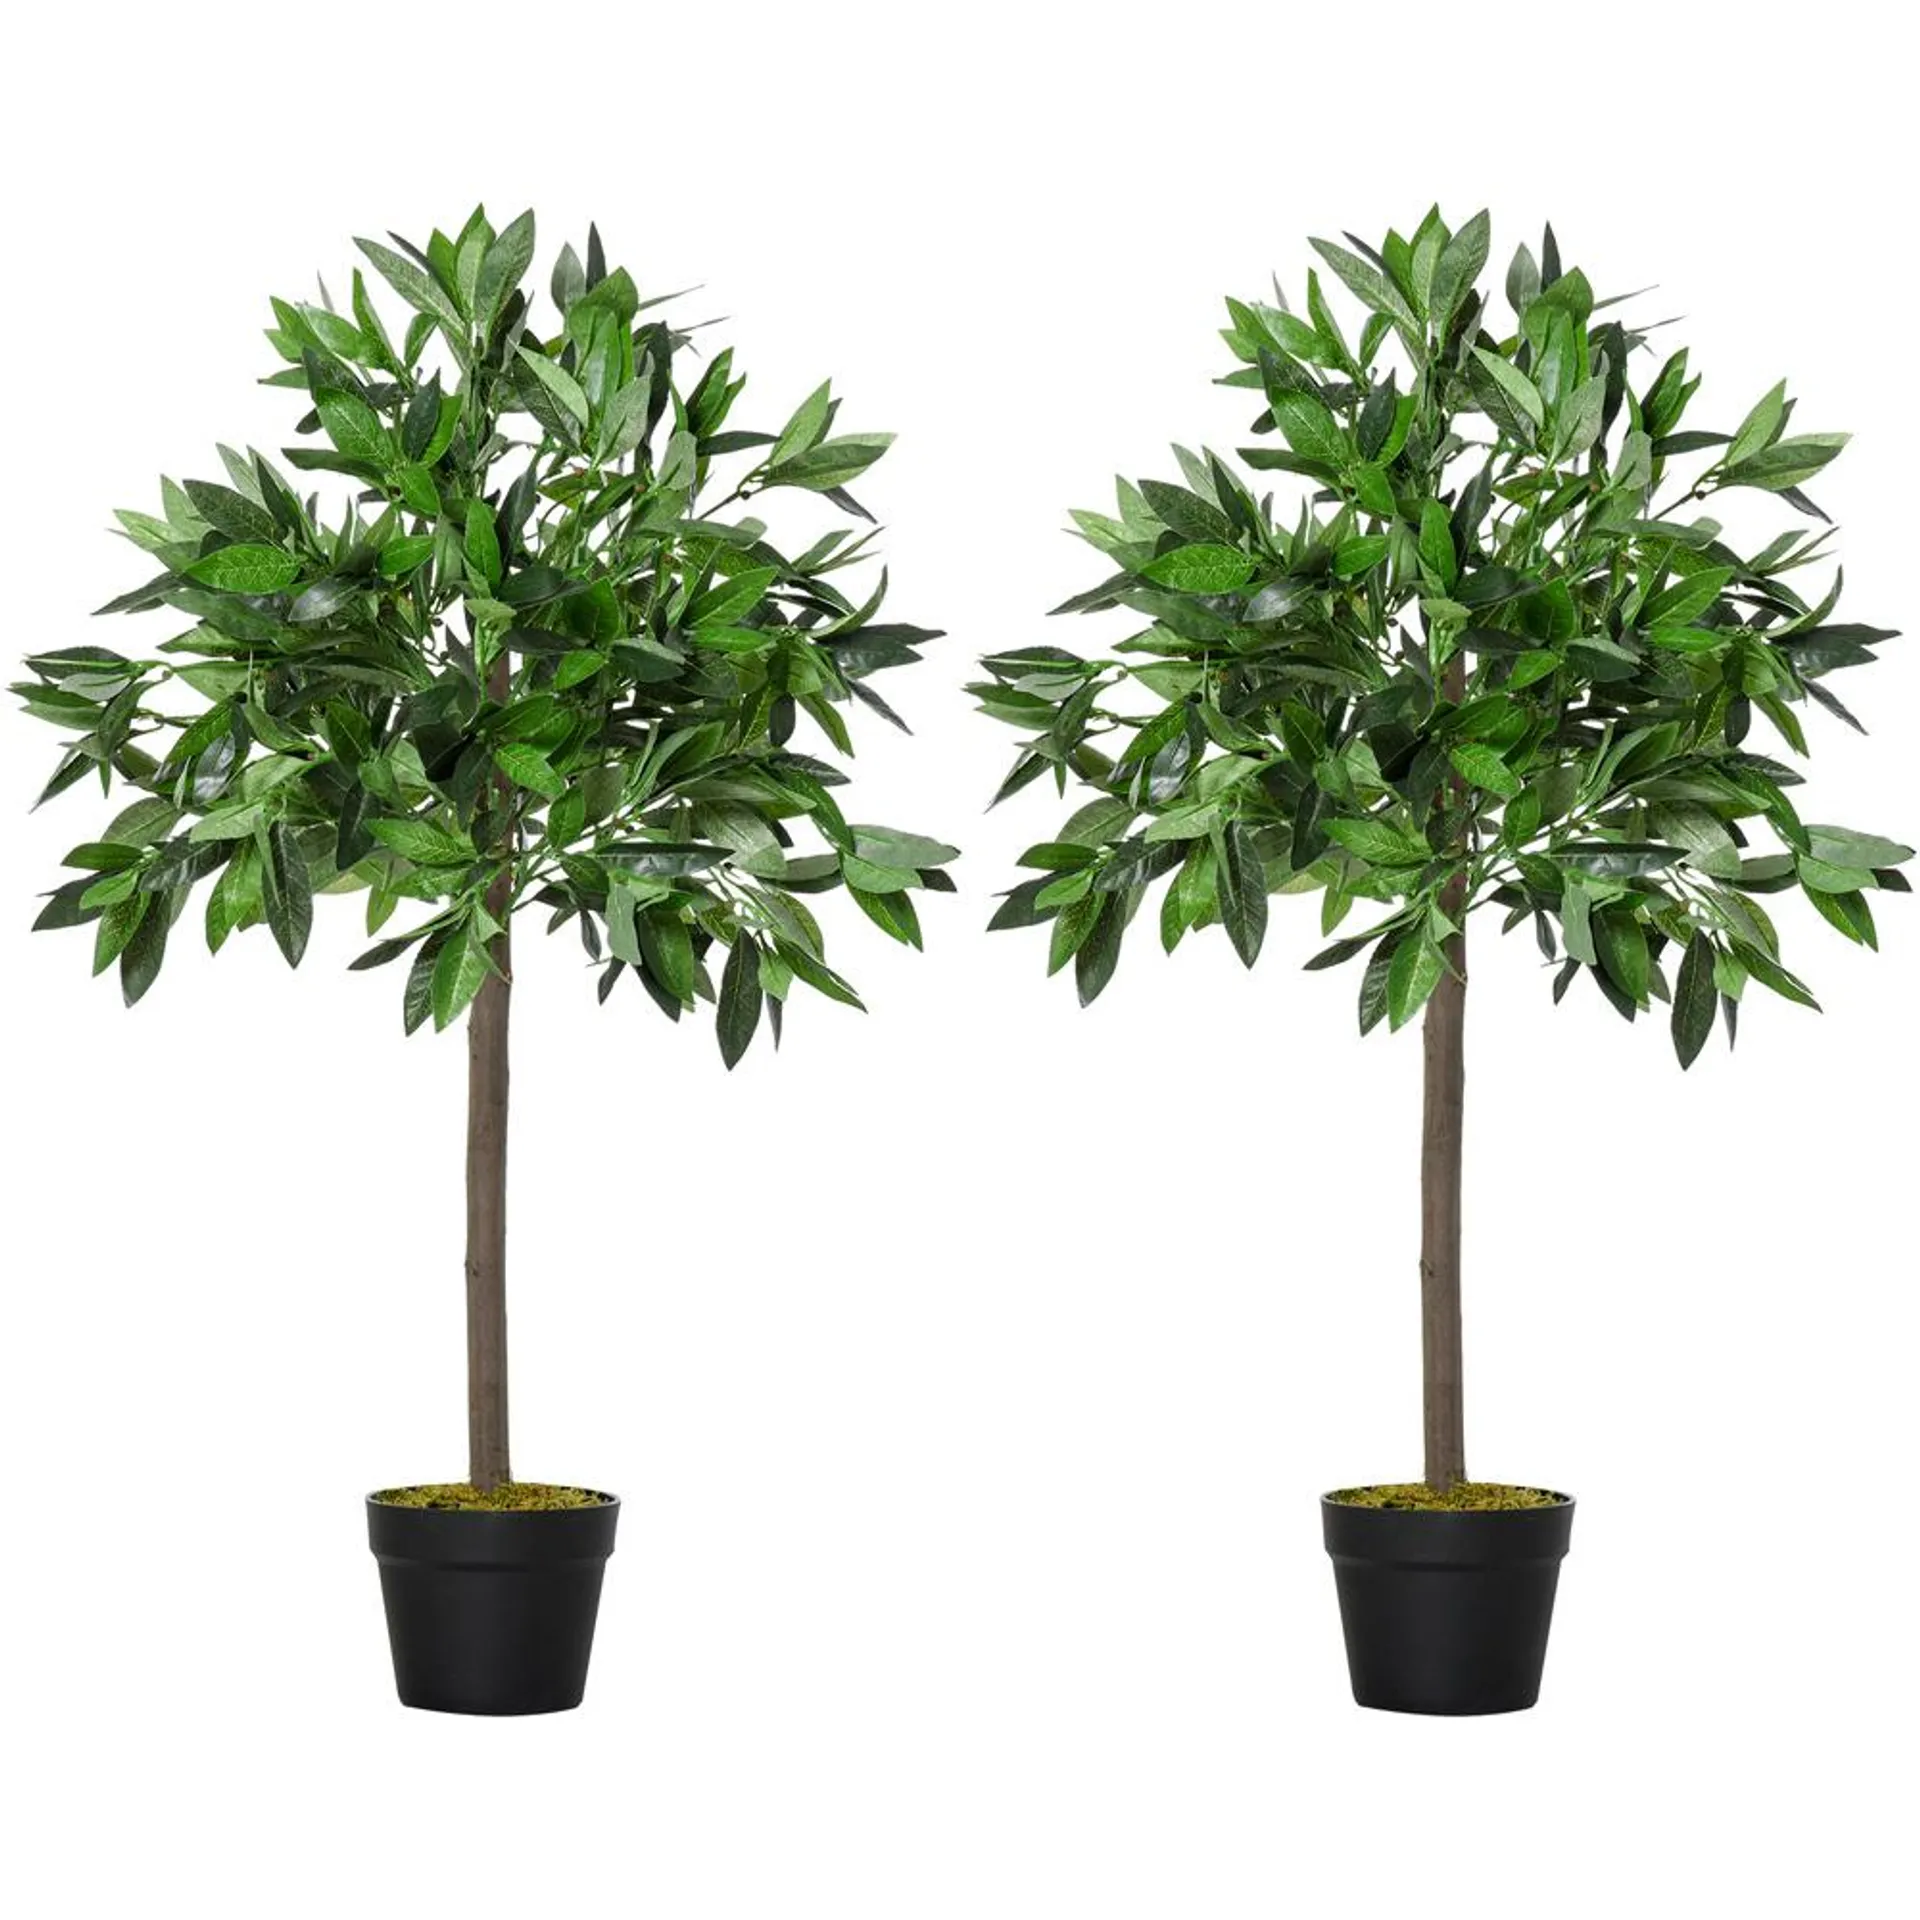 Outsunny Bay Leaf Laurel Ball Tree Artificial Plant In Pot 3ft 2 Pack